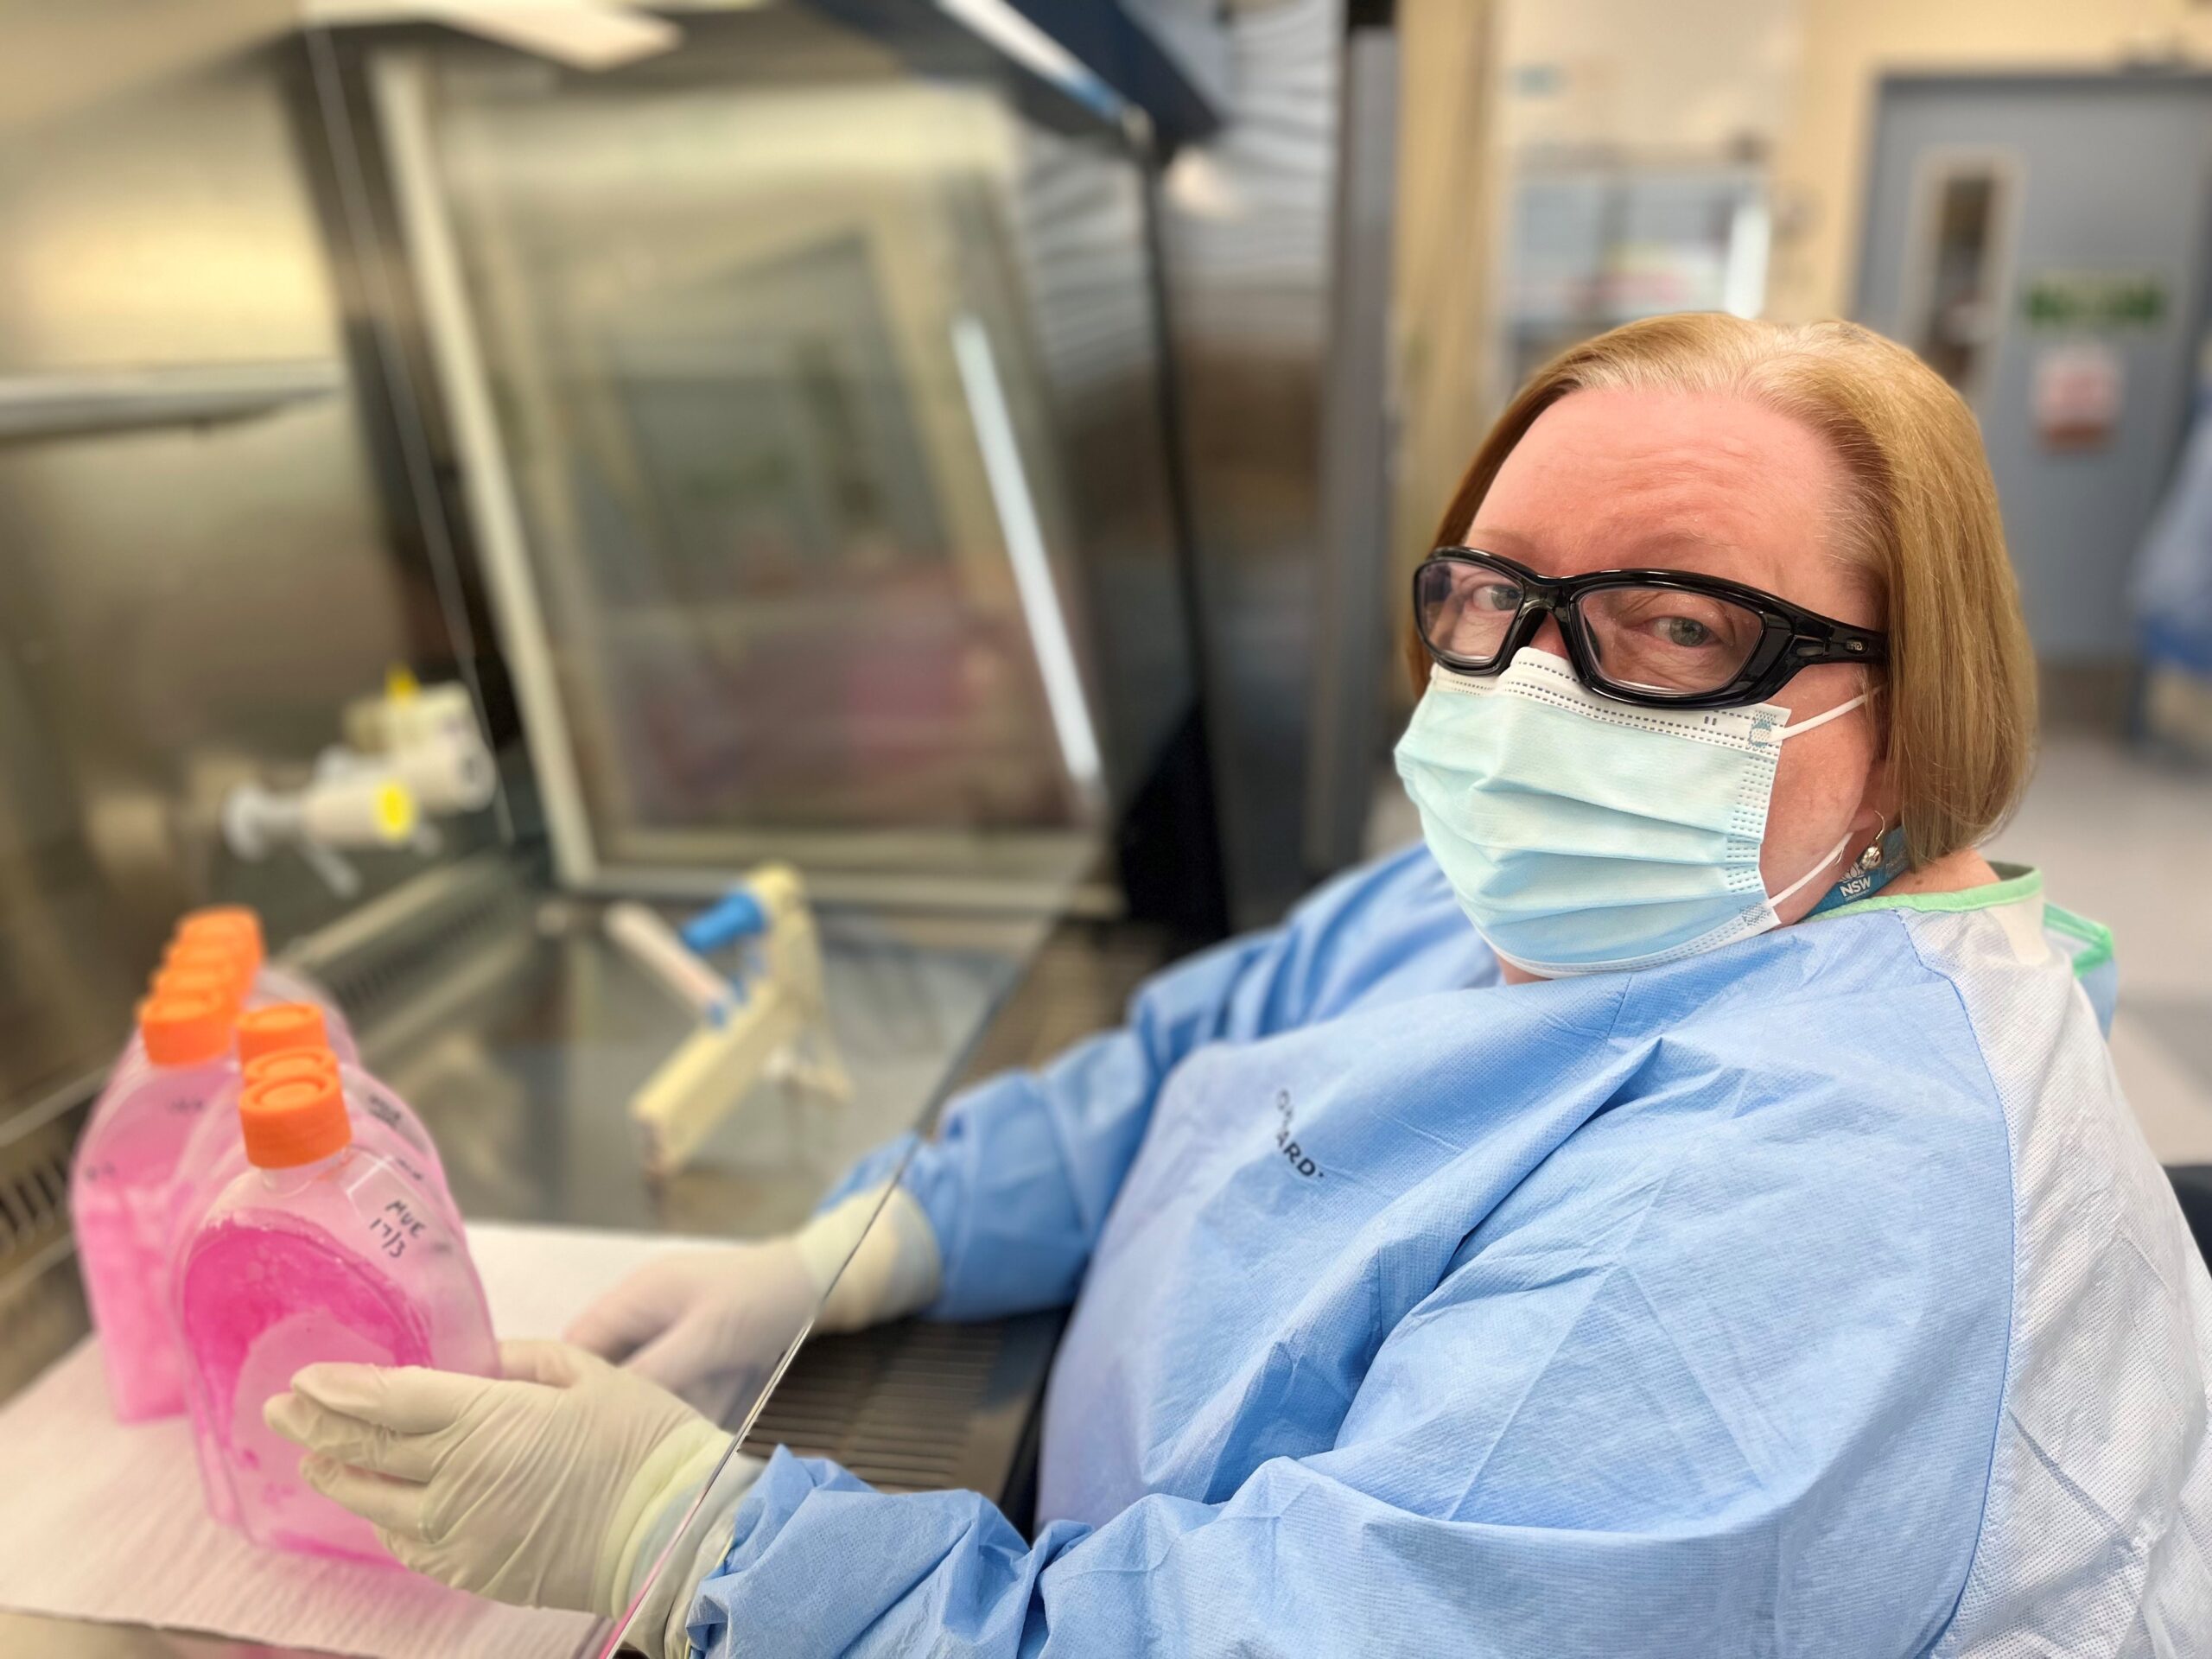 A woman wearing a mask, protective glasses and a protective gown sits in a lab holding containers of pink liquid.